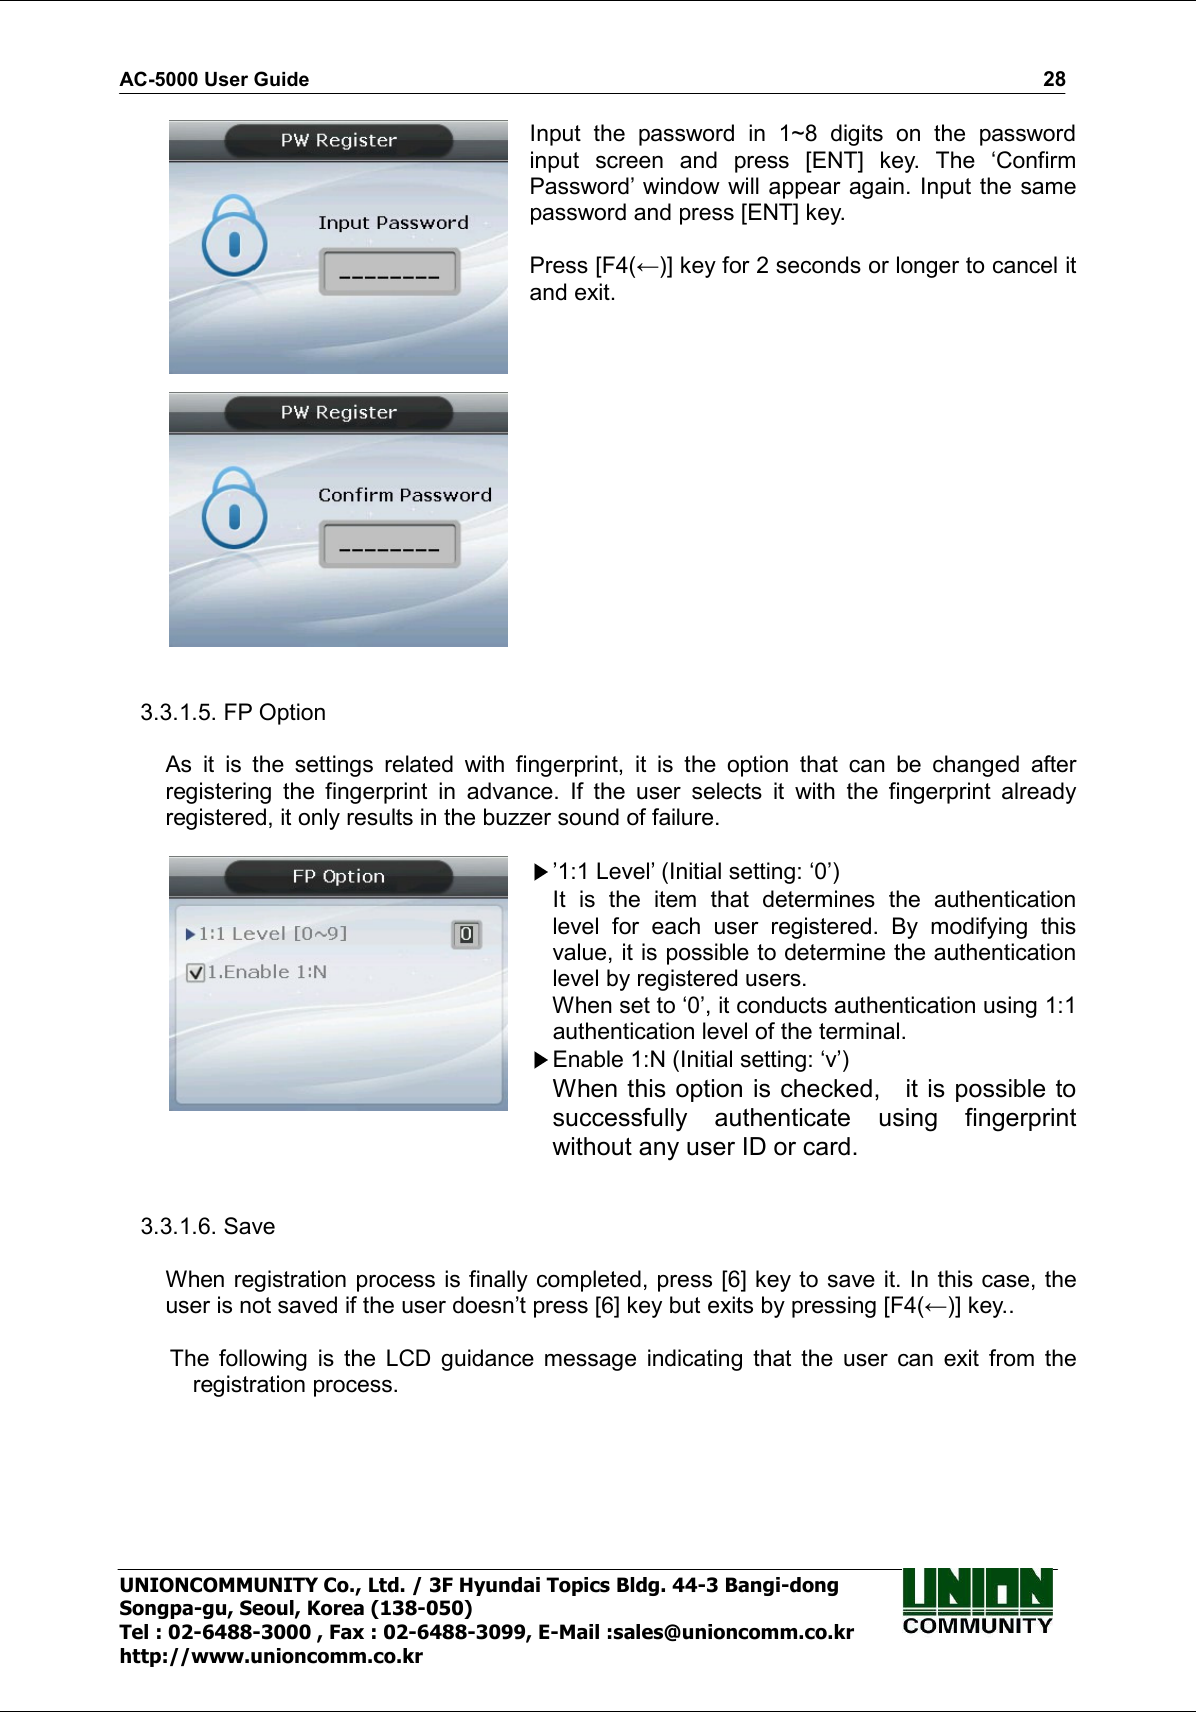 AC-5000 User Guide                                                                                                                                                   28 UNIONCOMMUNITY Co., Ltd. / 3F Hyundai Topics Bldg. 44-3 Bangi-dong Songpa-gu, Seoul, Korea (138-050) Tel : 02-6488-3000 , Fax : 02-6488-3099, E-Mail :sales@unioncomm.co.kr http://www.unioncomm.co.kr    Input  the  password  in  1~8  digits  on  the  password input  screen  and  press  [ENT]  key.  The  ‘Confirm Password’ window will appear  again. Input the same password and press [ENT] key.  Press [F4(←)] key for 2 seconds or longer to cancel it and exit.   3.3.1.5. FP Option  As  it  is  the  settings  related  with  fingerprint,  it  is  the  option  that  can  be  changed  after registering  the  fingerprint  in  advance.  If  the  user  selects  it  with  the  fingerprint  already registered, it only results in the buzzer sound of failure.   ’1:1 Level’ (Initial setting: ‘0’) It  is  the  item  that  determines  the  authentication level  for  each  user  registered.  By  modifying  this value, it is possible to determine the authentication level by registered users.       When set to ‘0’, it conducts authentication using 1:1 authentication level of the terminal. Enable 1:N (Initial setting: ‘v’) When this option is checked,    it is possible to successfully  authenticate  using  fingerprint without any user ID or card.   3.3.1.6. Save  When registration process is finally completed, press [6] key to save it. In this case, the user is not saved if the user doesn’t press [6] key but exits by pressing [F4(←)] key..  The  following  is  the  LCD  guidance  message  indicating  that  the  user  can  exit  from  the registration process.  